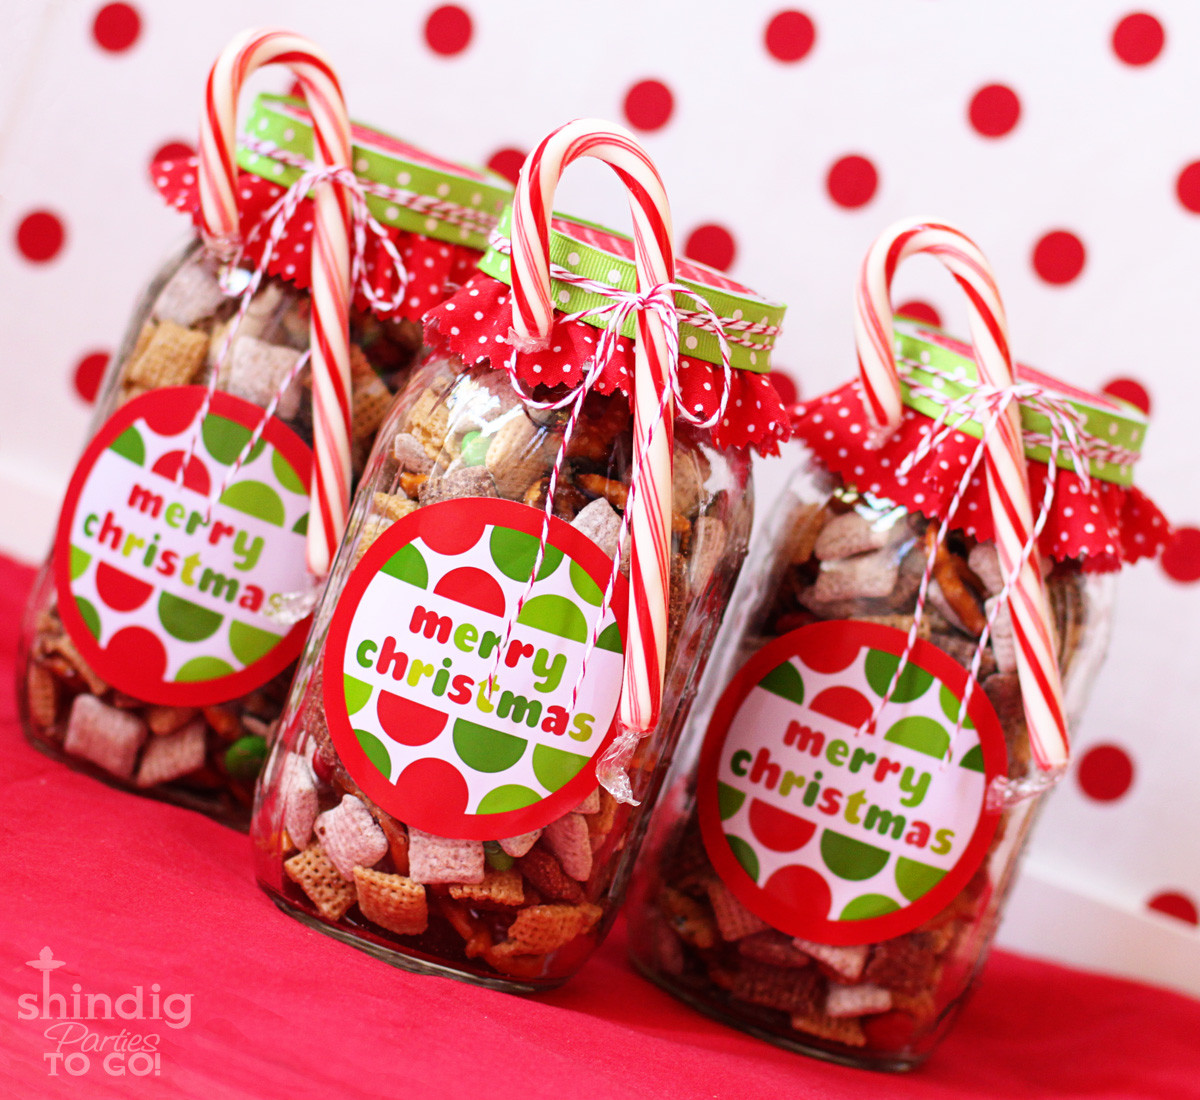 Homemade Christmas Candy Gifts
 How To Make Handmade Chex Mix Holiday Gifts & Bonus Free